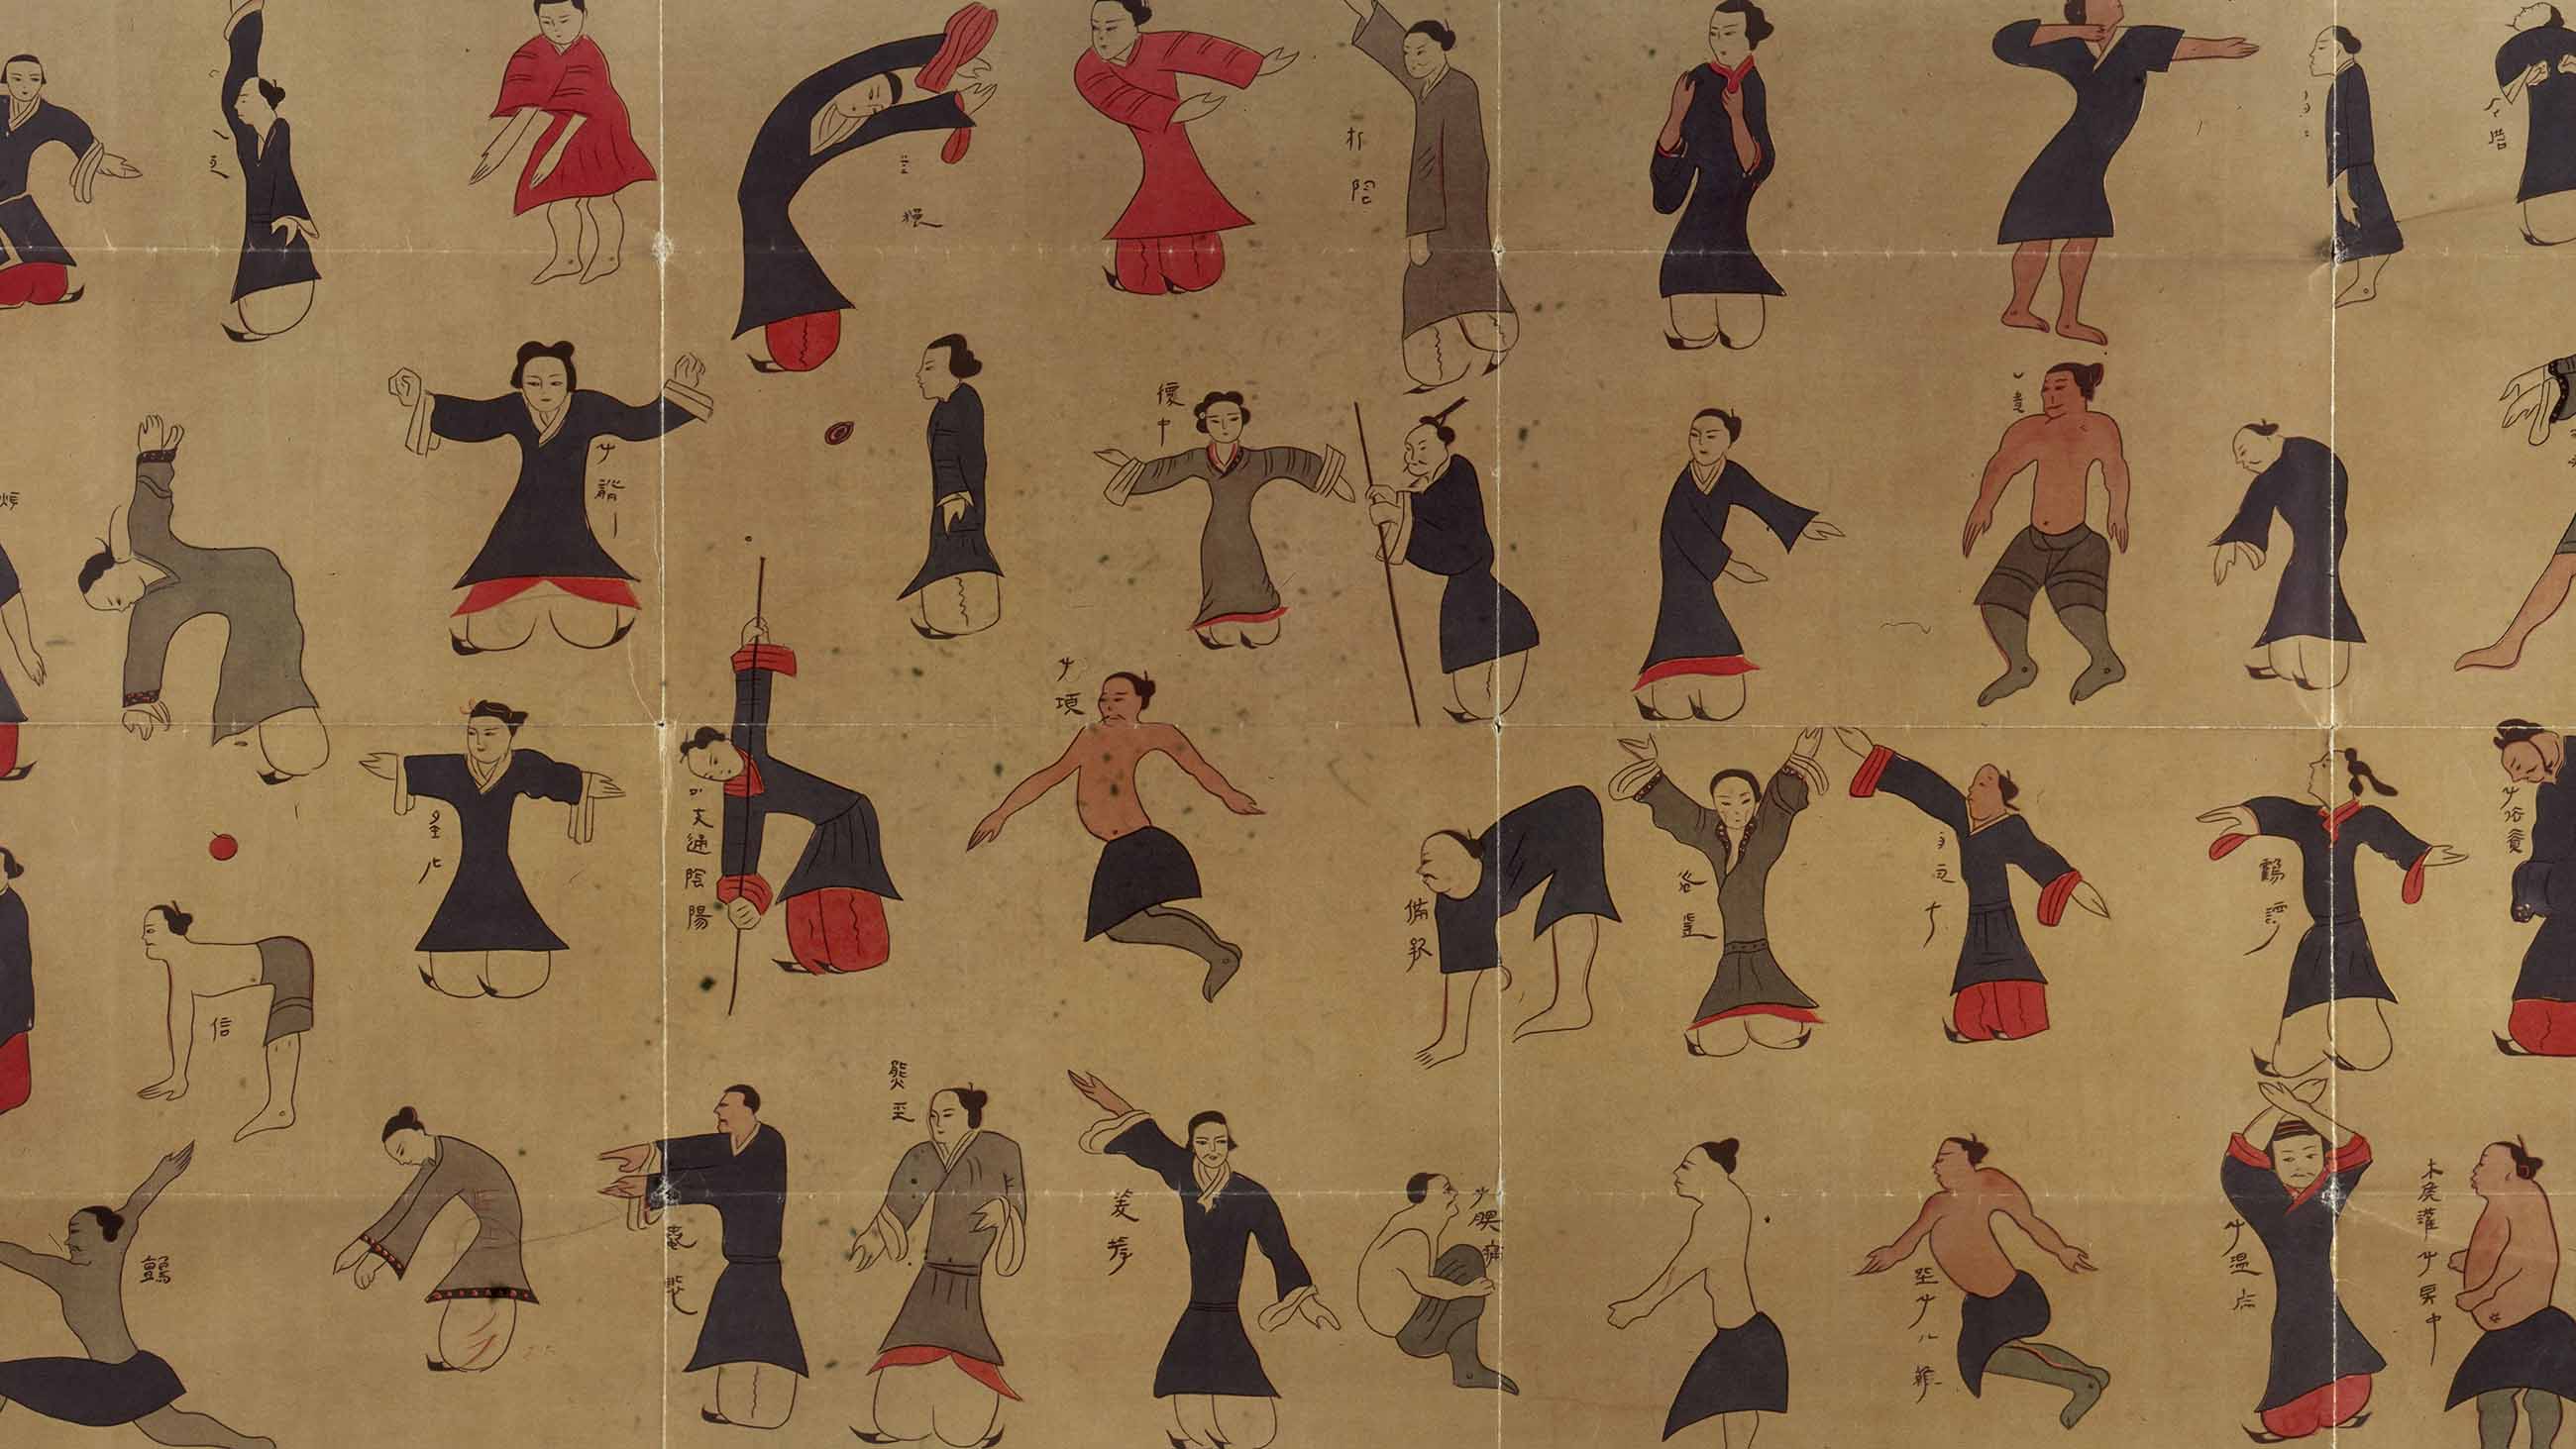 A Daoyin chart, circa 168 B.C., for leading and guiding people through exercises designed to improve health and treat pain.